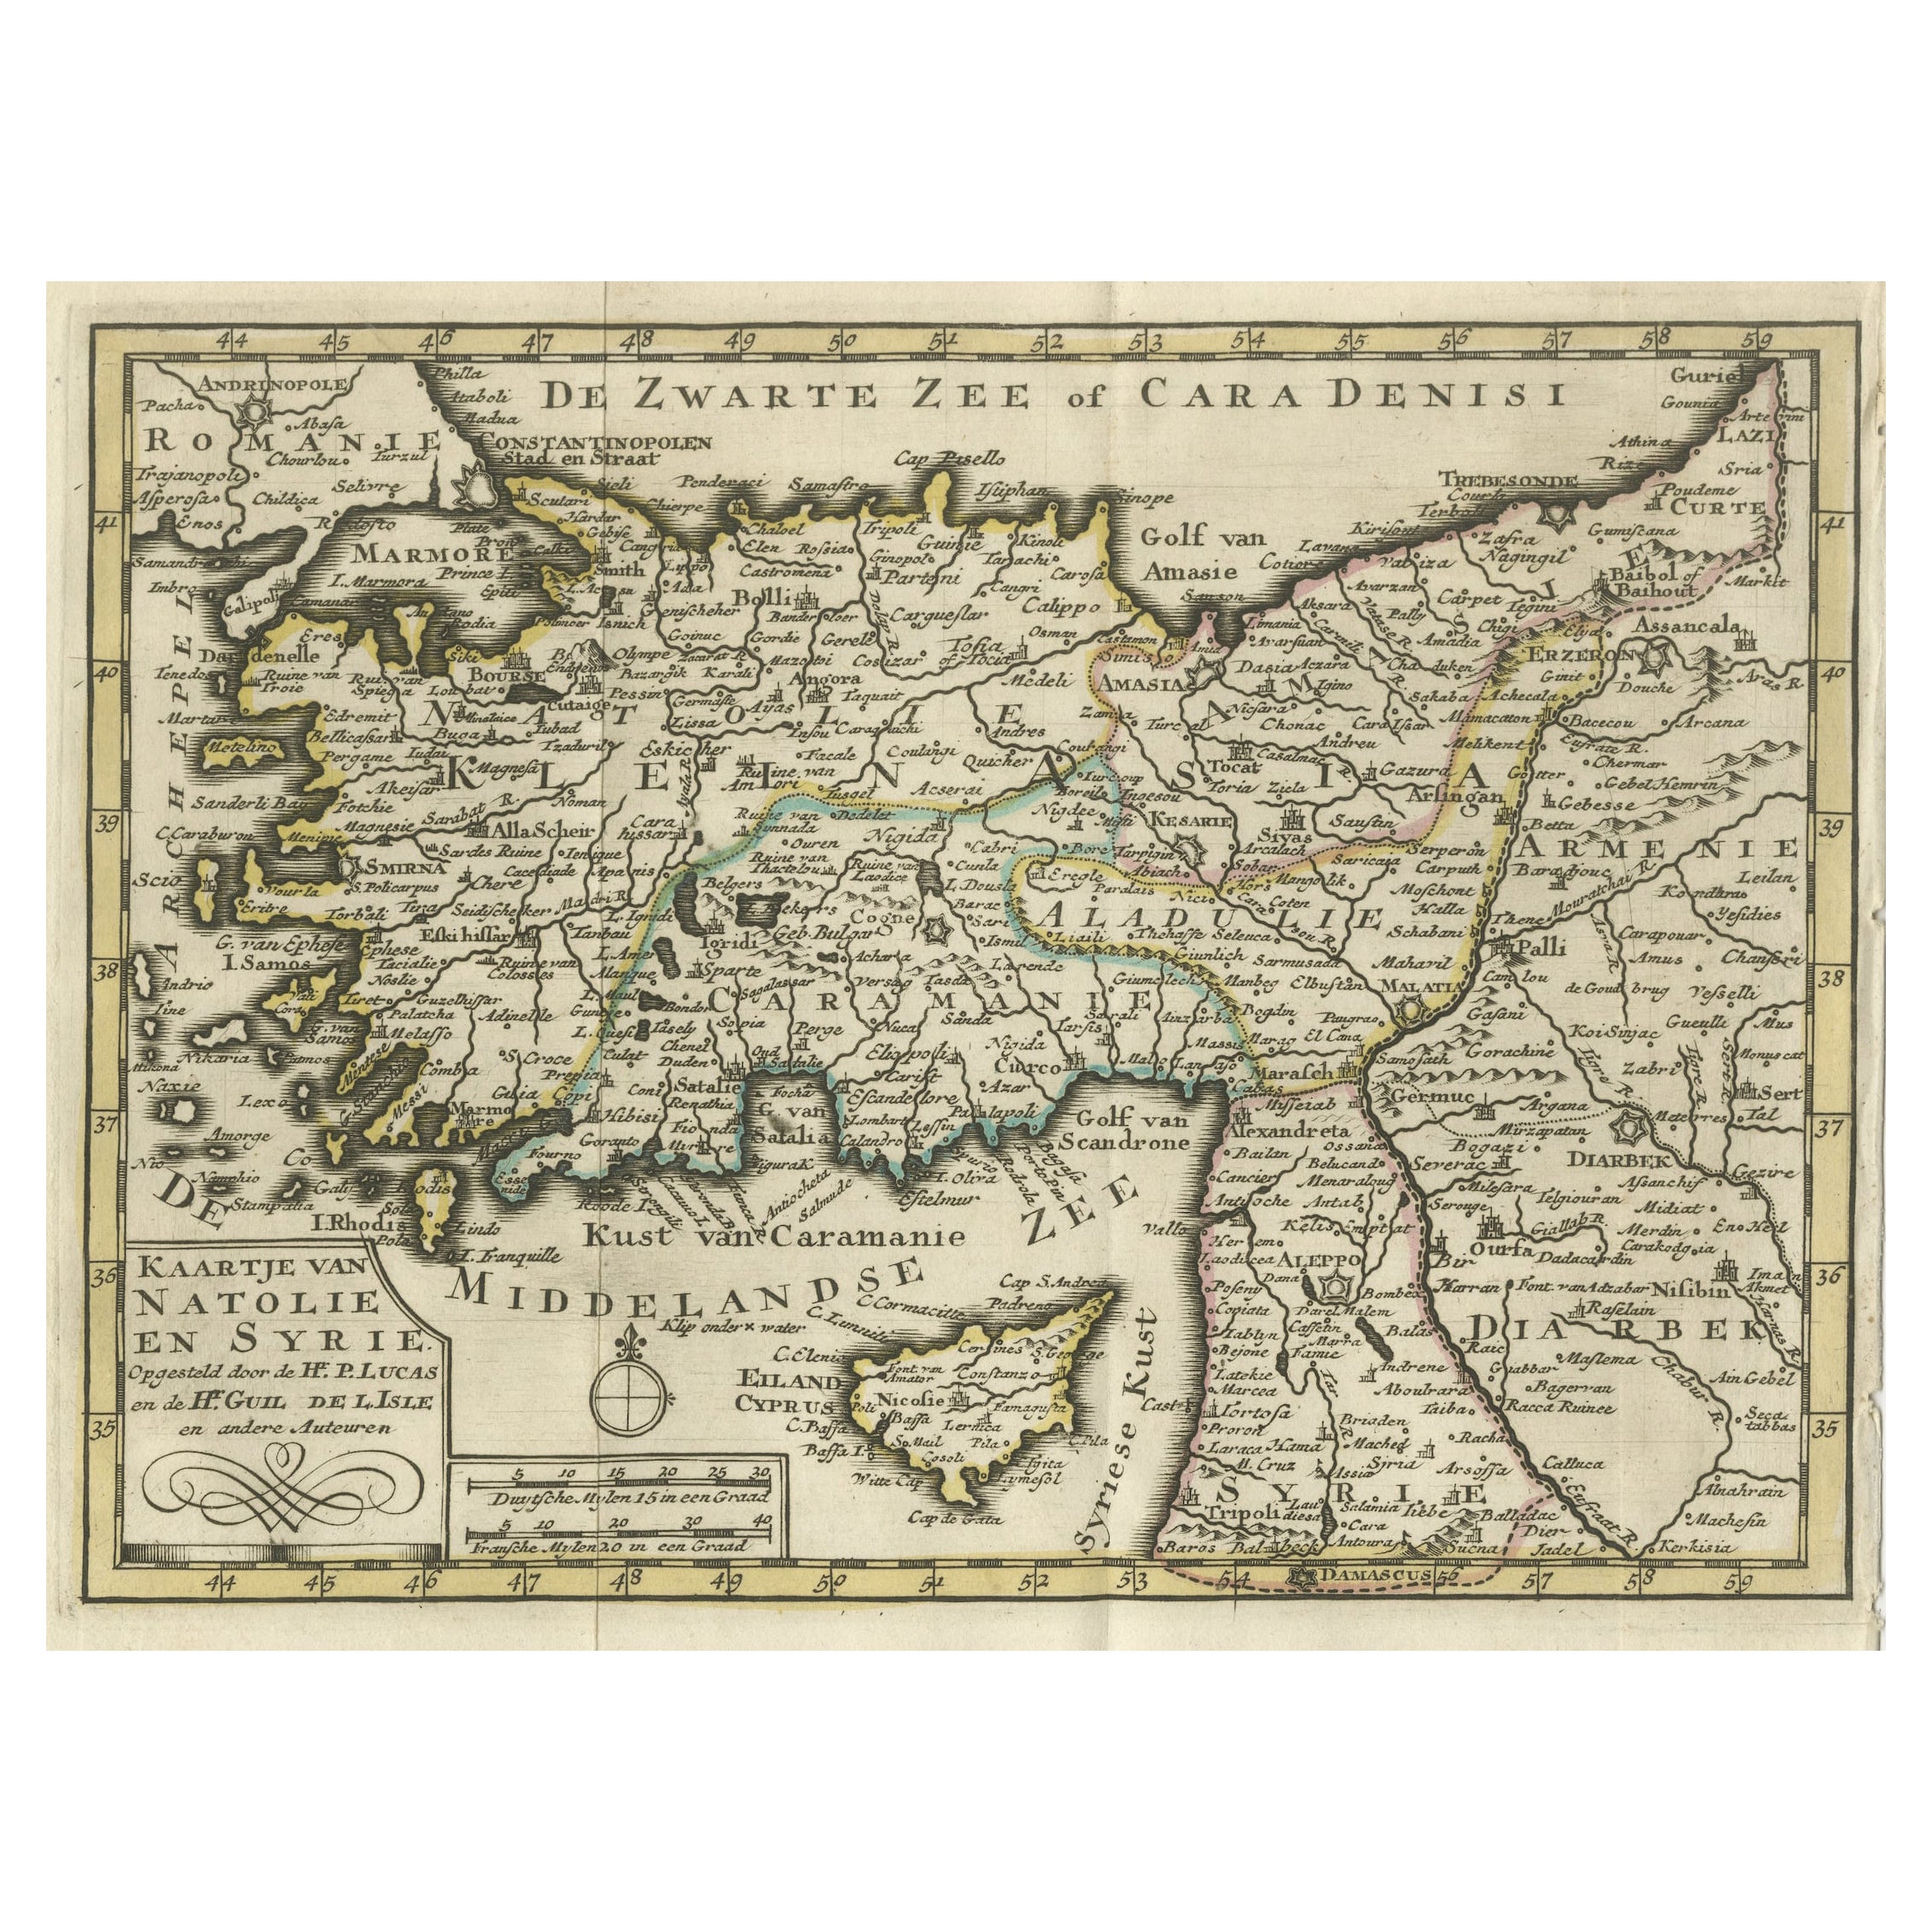 Old Map of Anatolia, part of modern-day Turkey, Armenia and Syria, 1745 For Sale